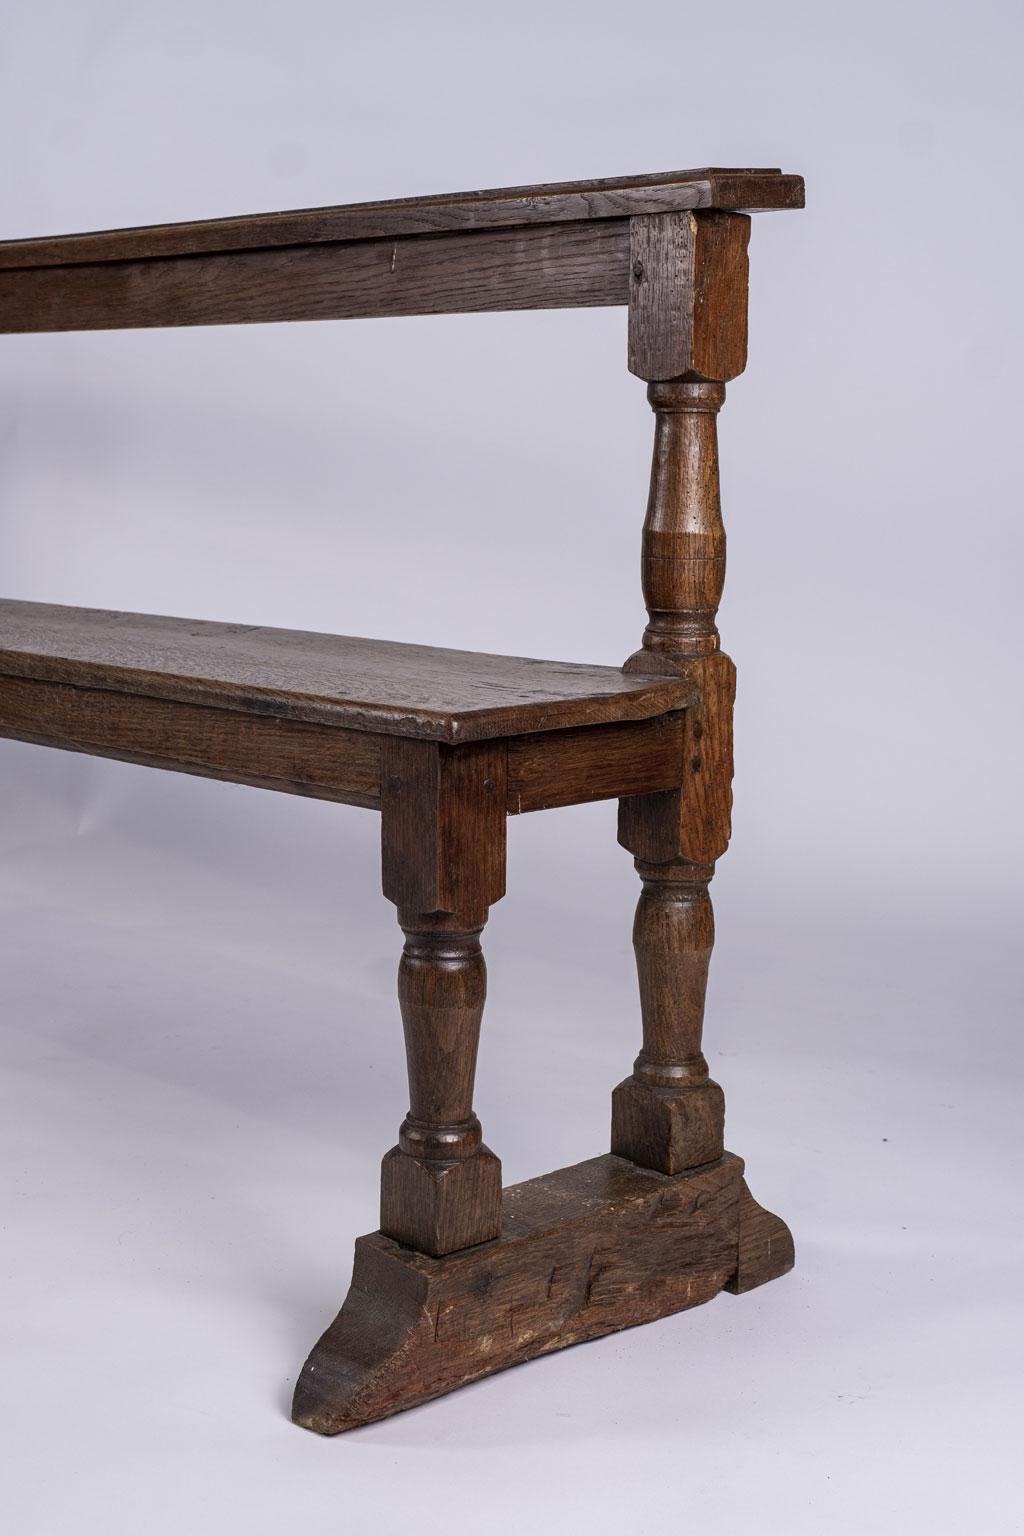 Narrow Belgian brown oak bench circa 1870-1890 from a monastery. Simple lines and classic shape. Perfect seating for the foot of a bed or narrow hallway. Seat measures: 18 inches high x 69.5 inches wide x 10.25 inches deep.